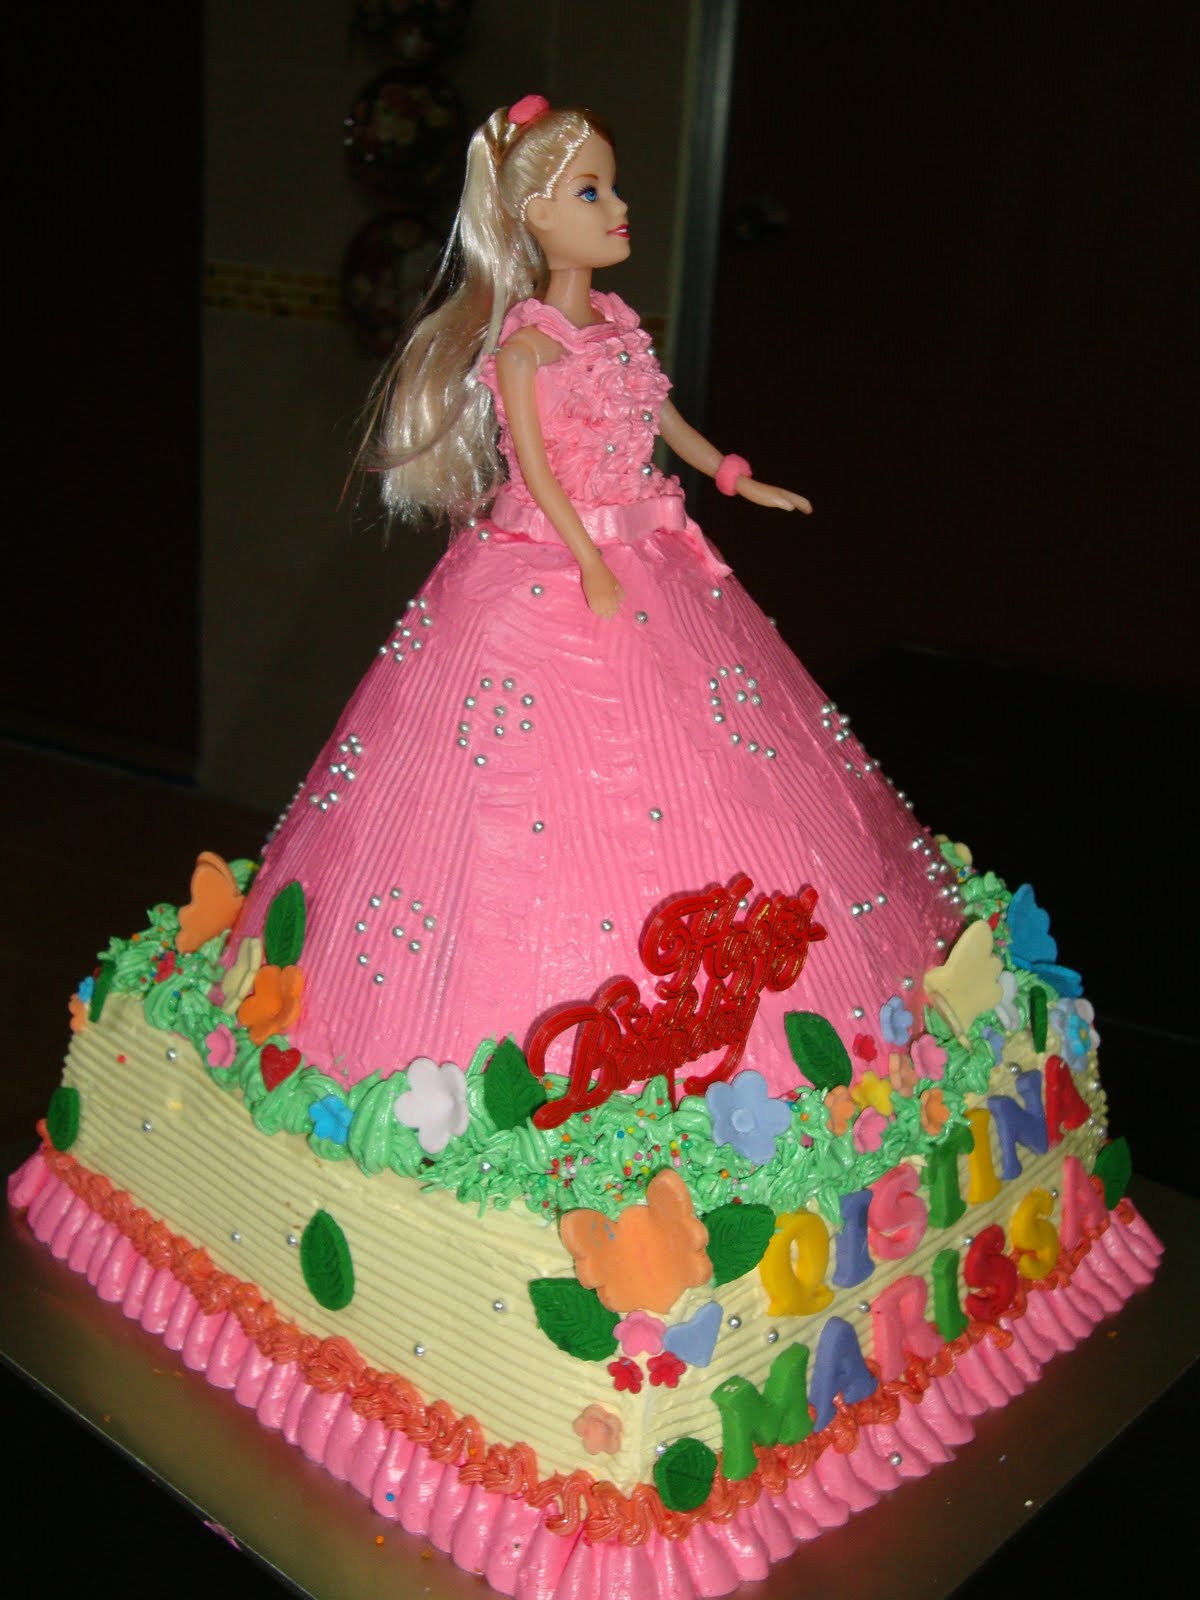 How to make a Barbie Cake - Its easier than you think 